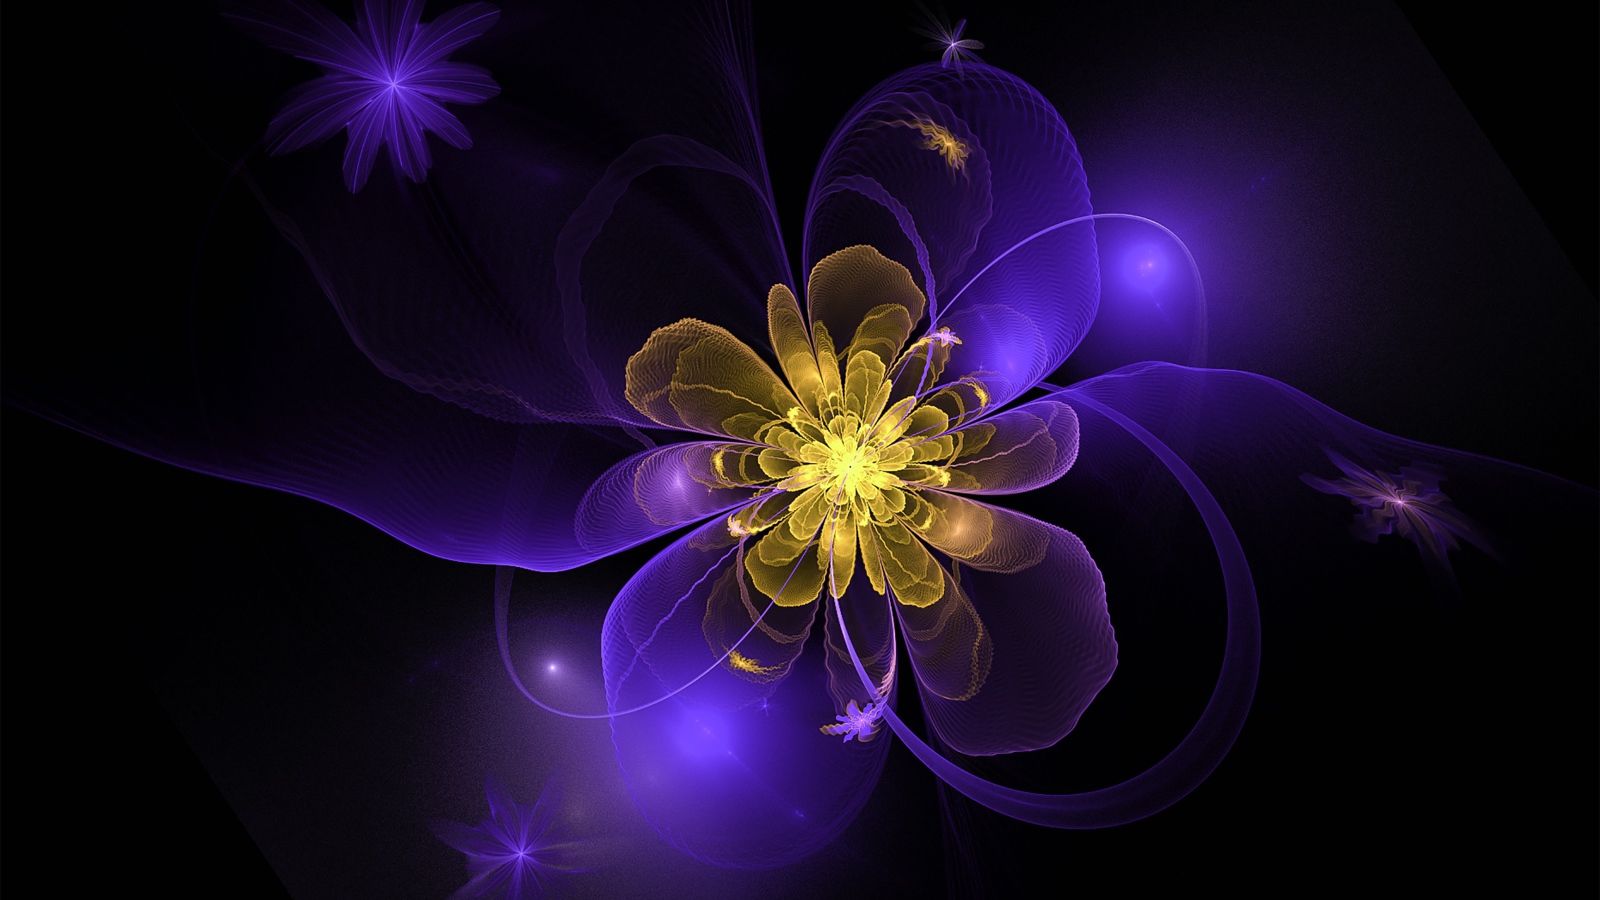 Purple fractal with yellow middle on black background